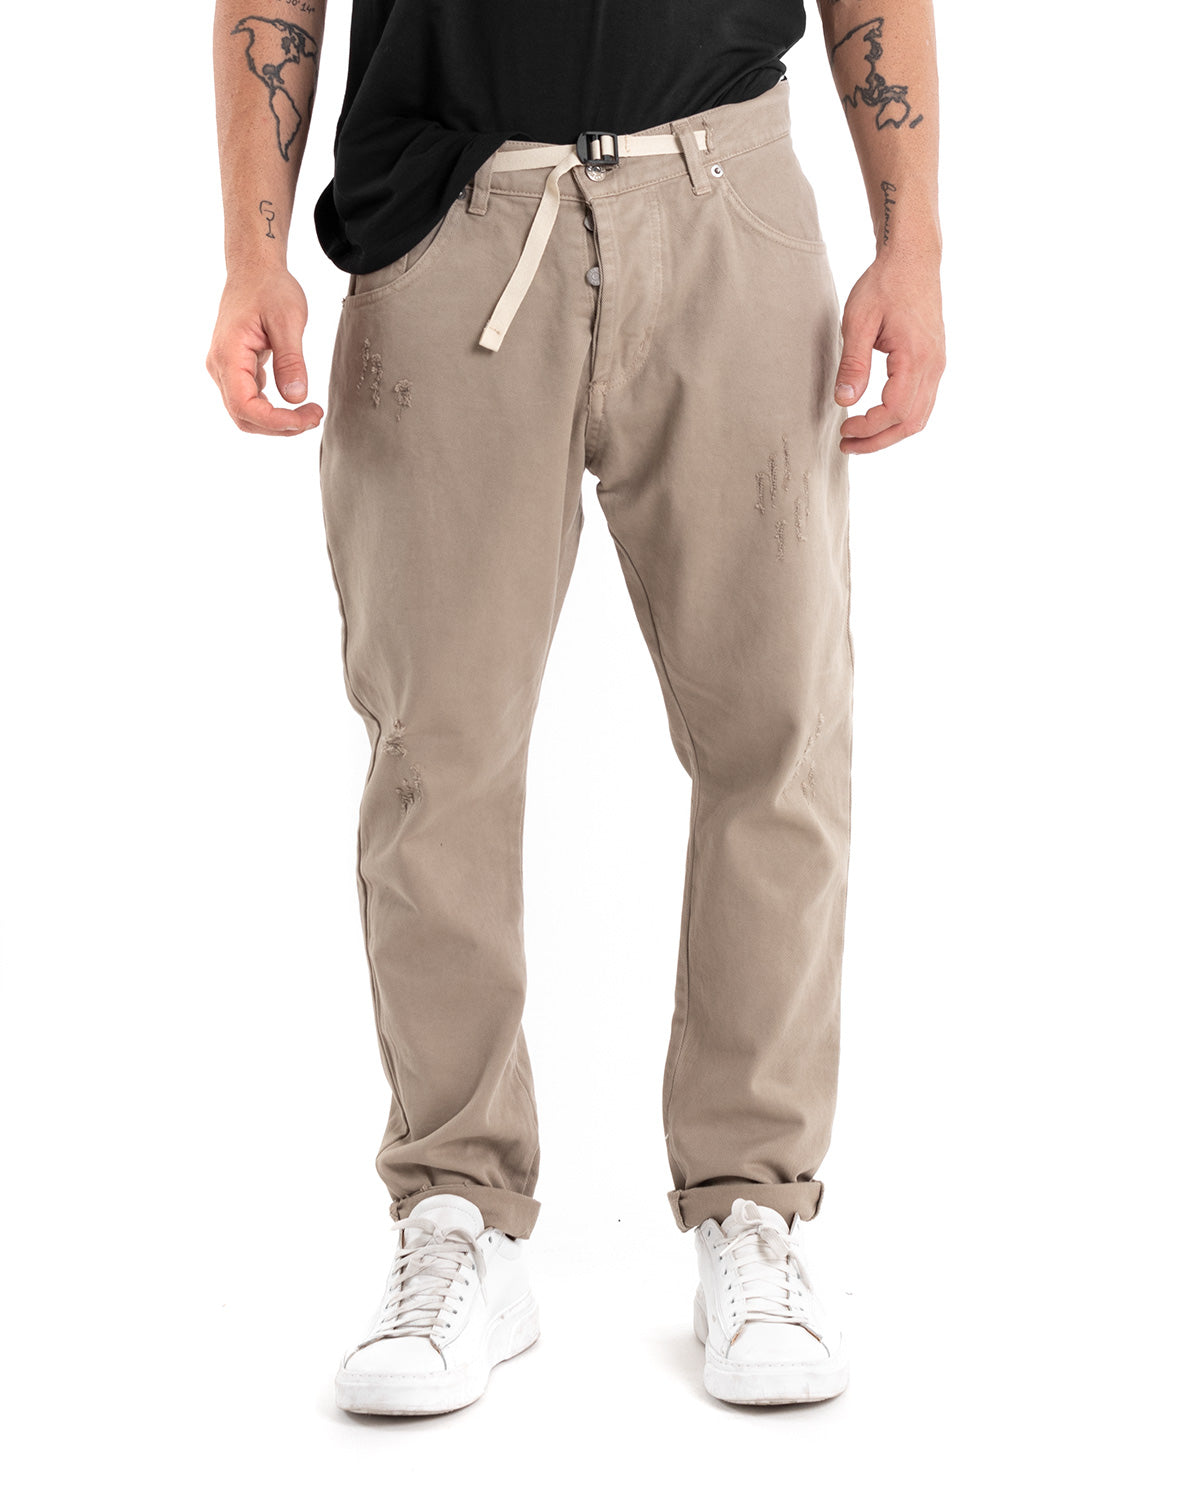 Men's Jeans Trousers With Rips Loose Fit Beige Five Pockets Casual GIOSAL-P5461A